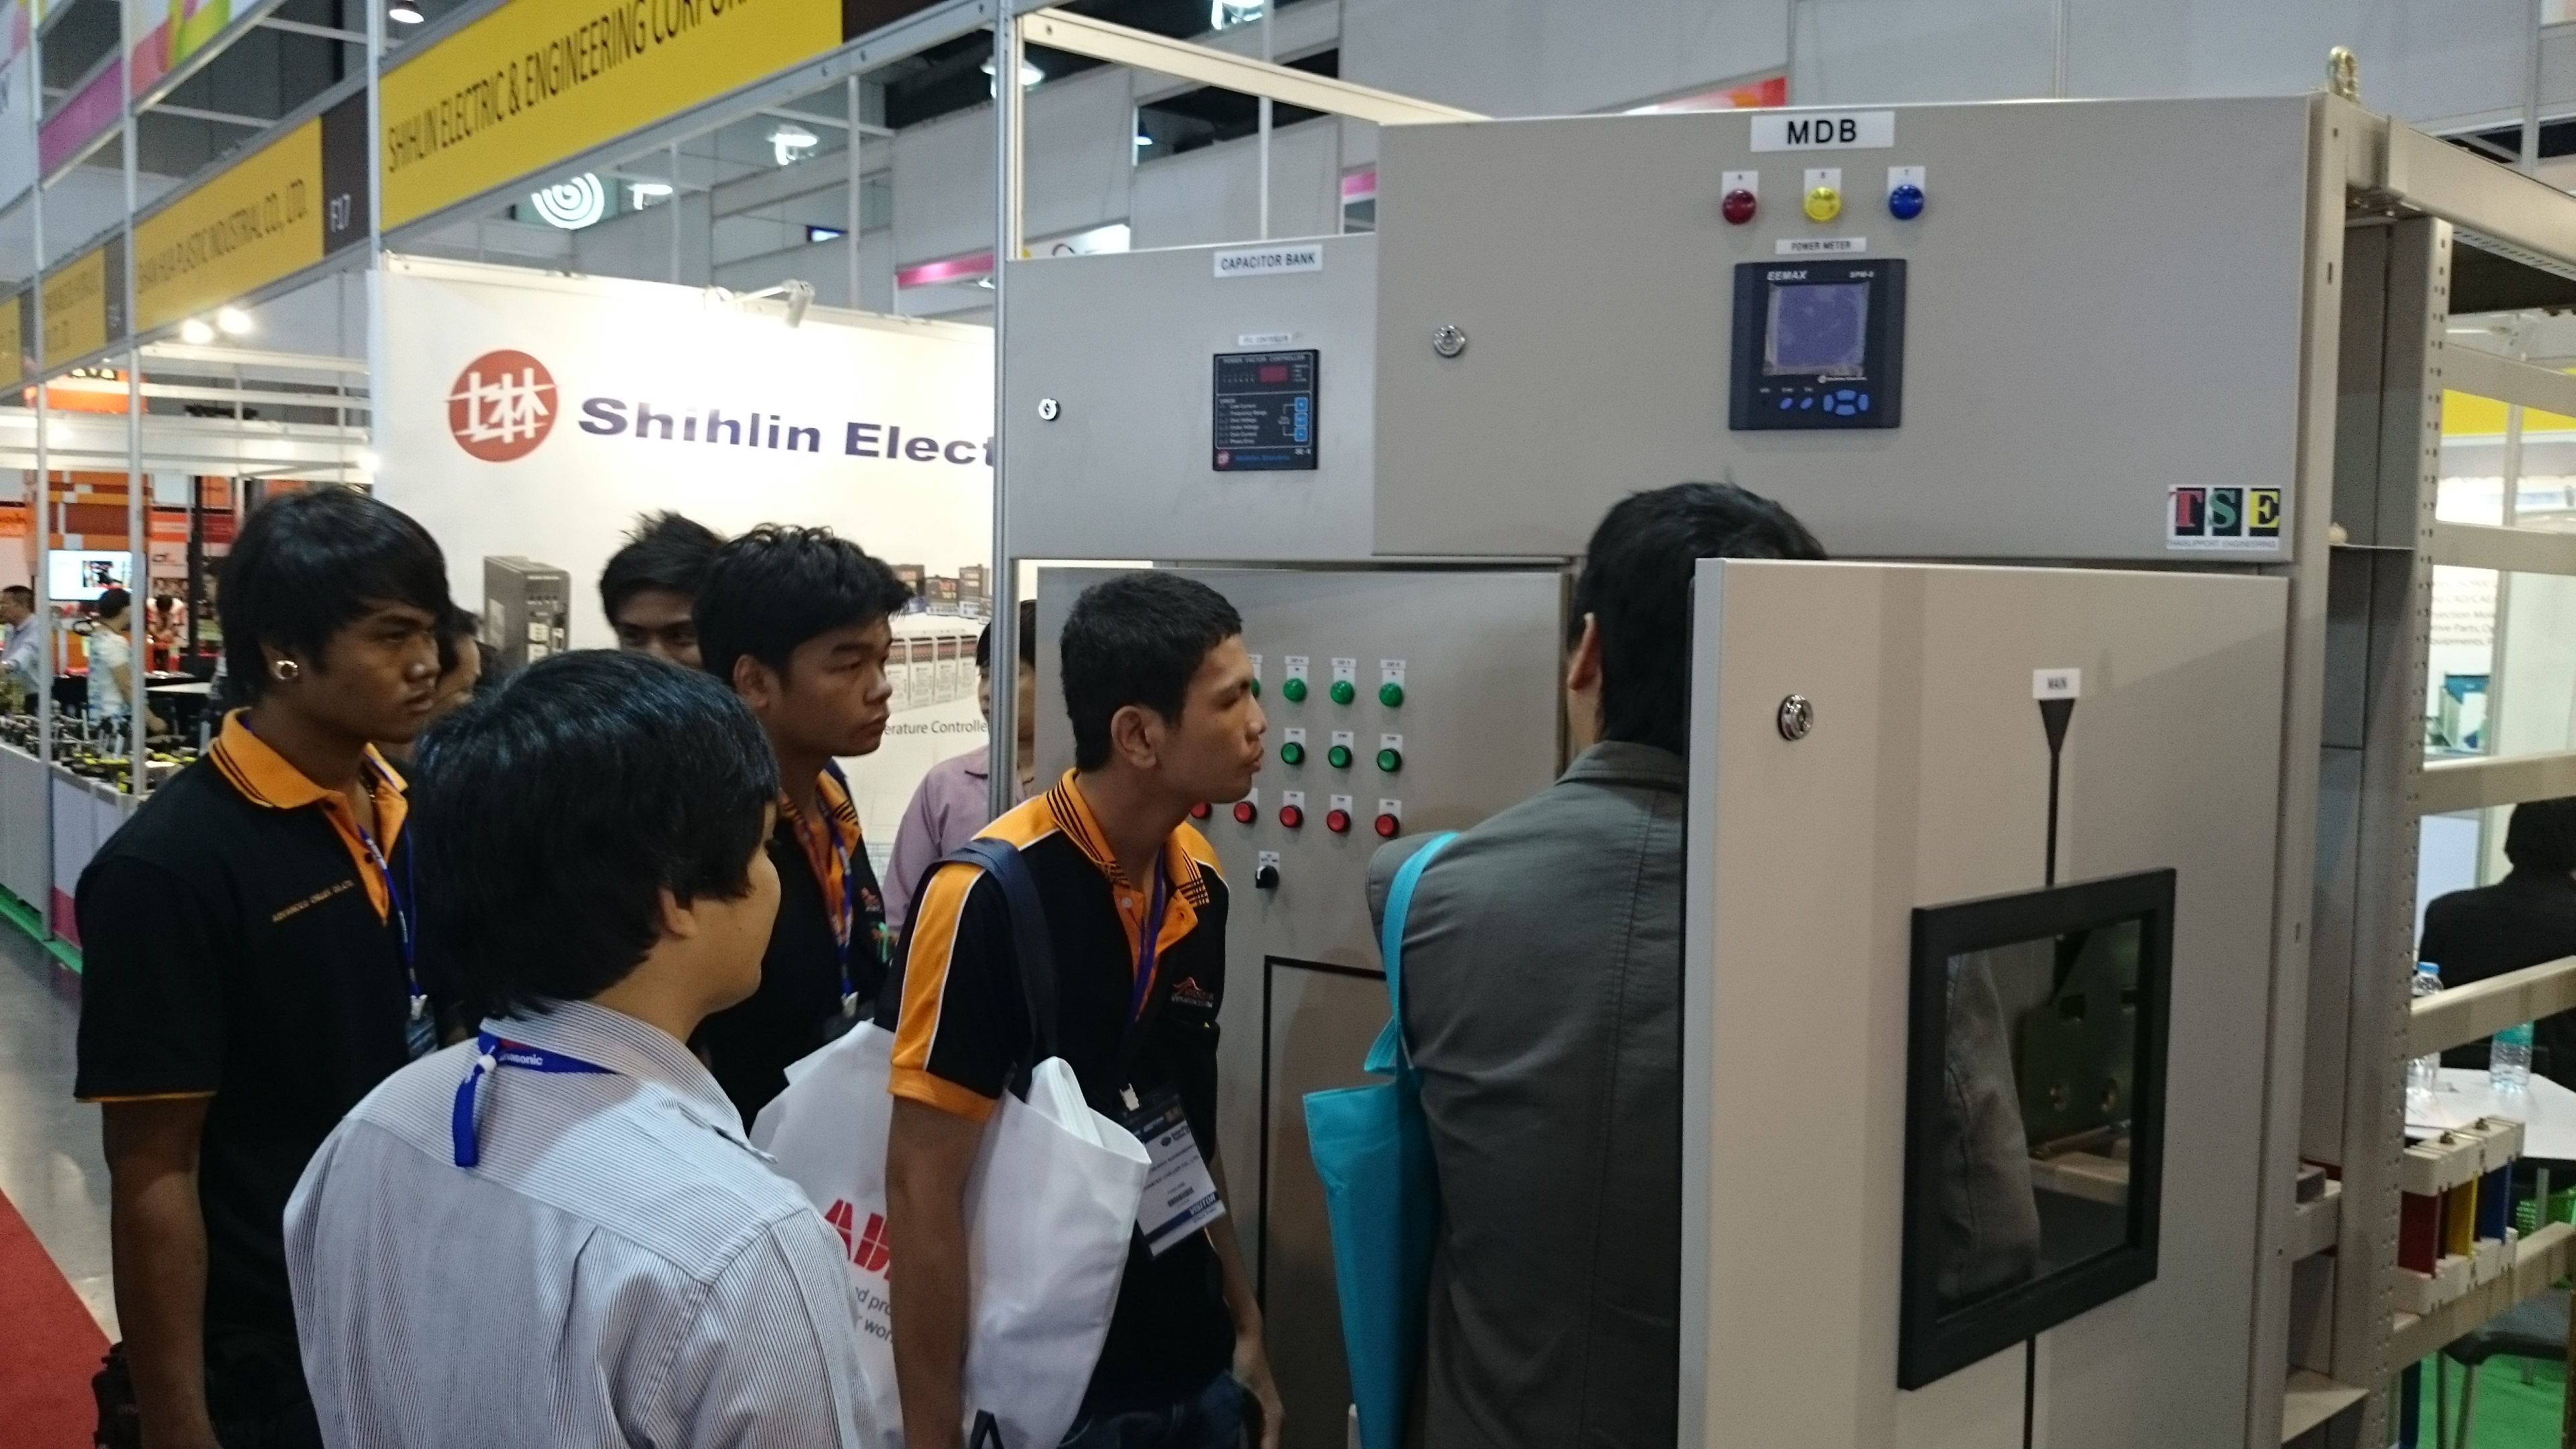 Shihlin Electric stand